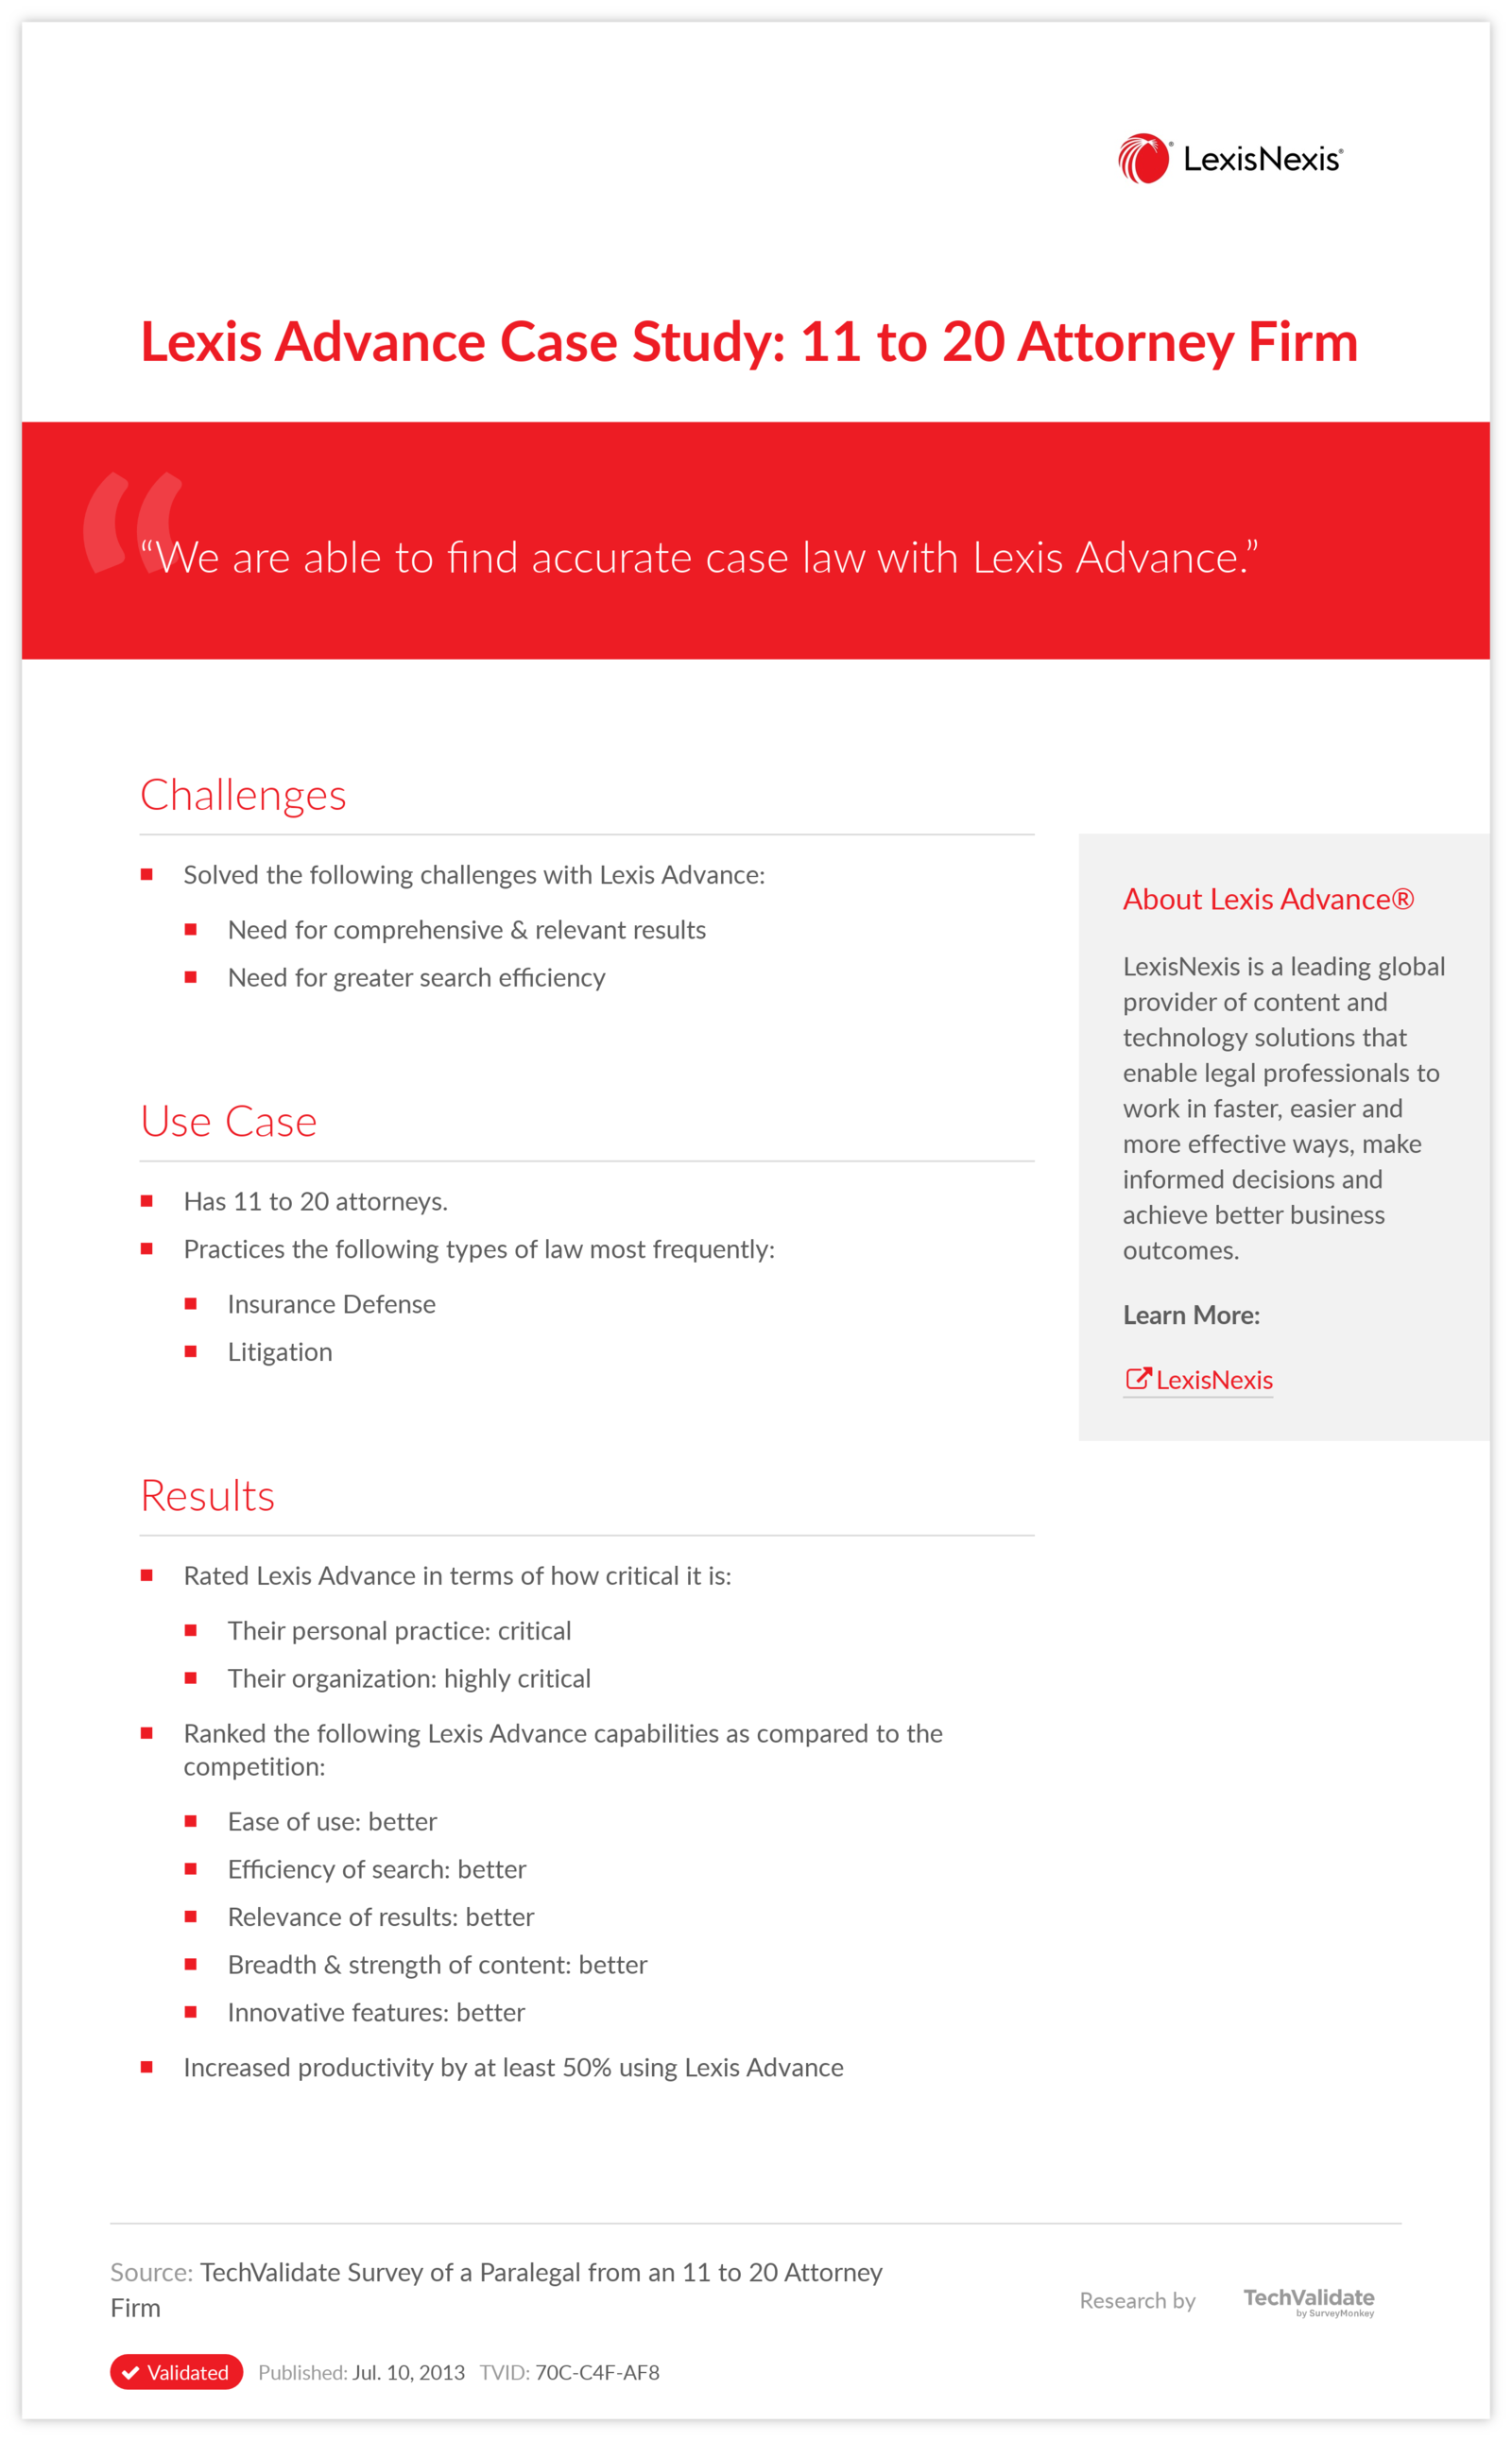 Lexis Advance Case Study: 11 to 20 Attorney Firm